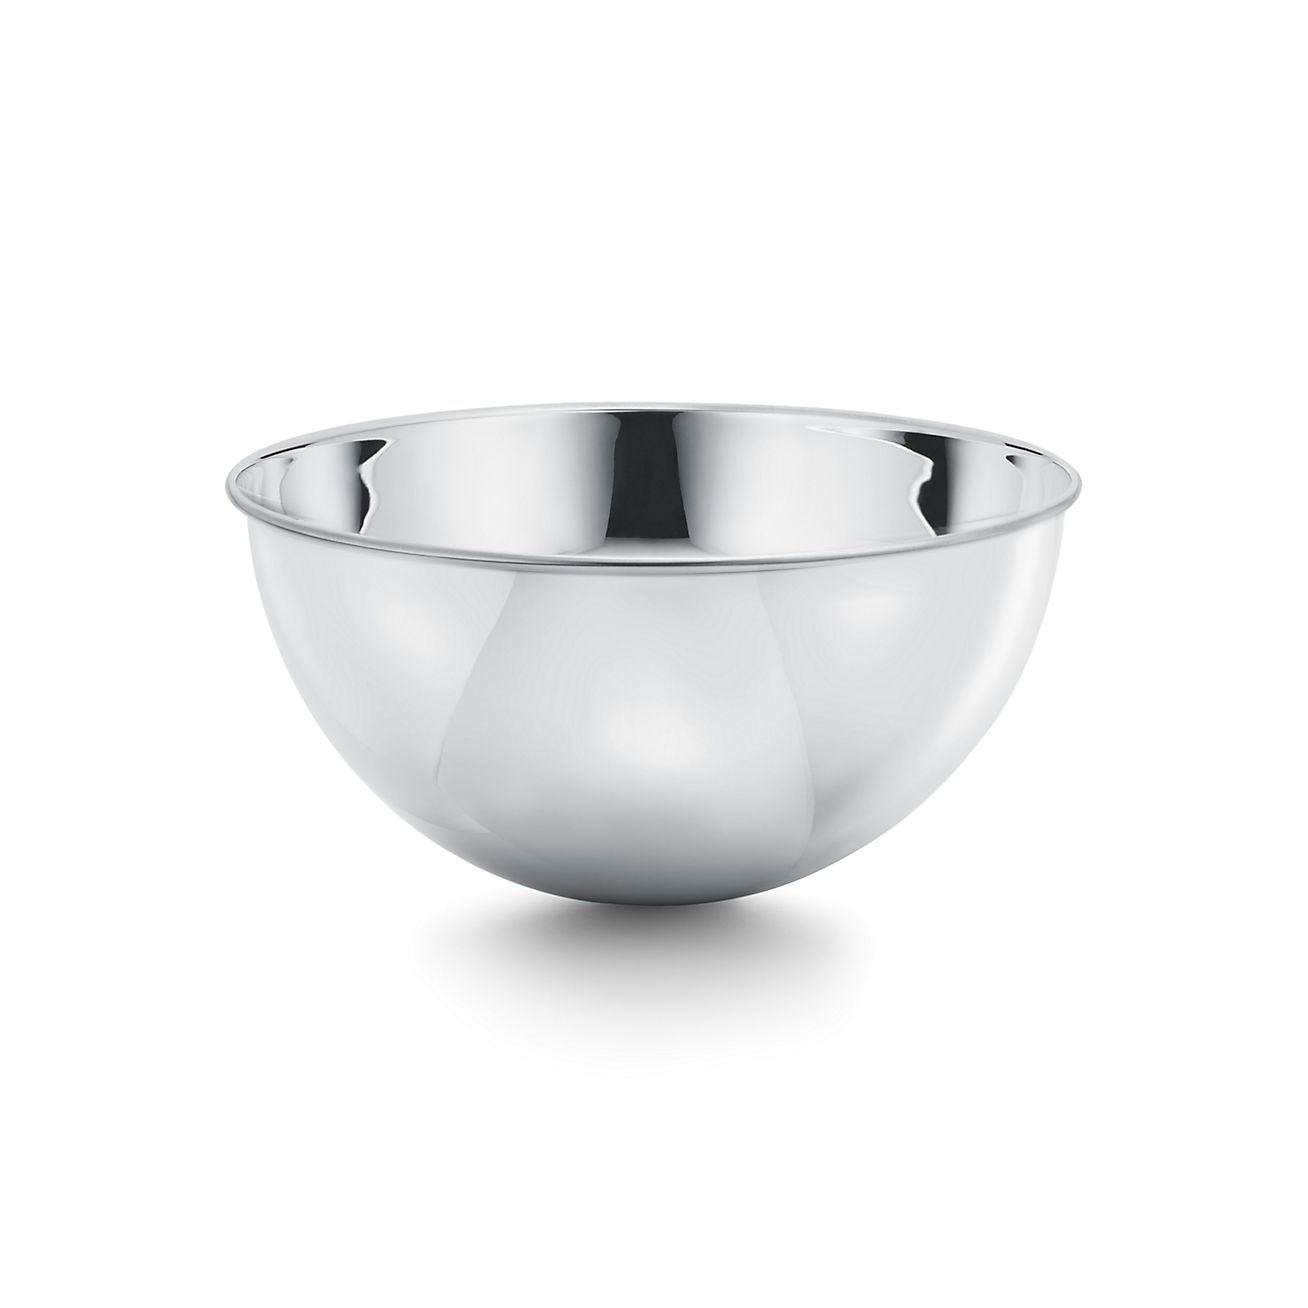 Round bowl in sterling silver, 7 